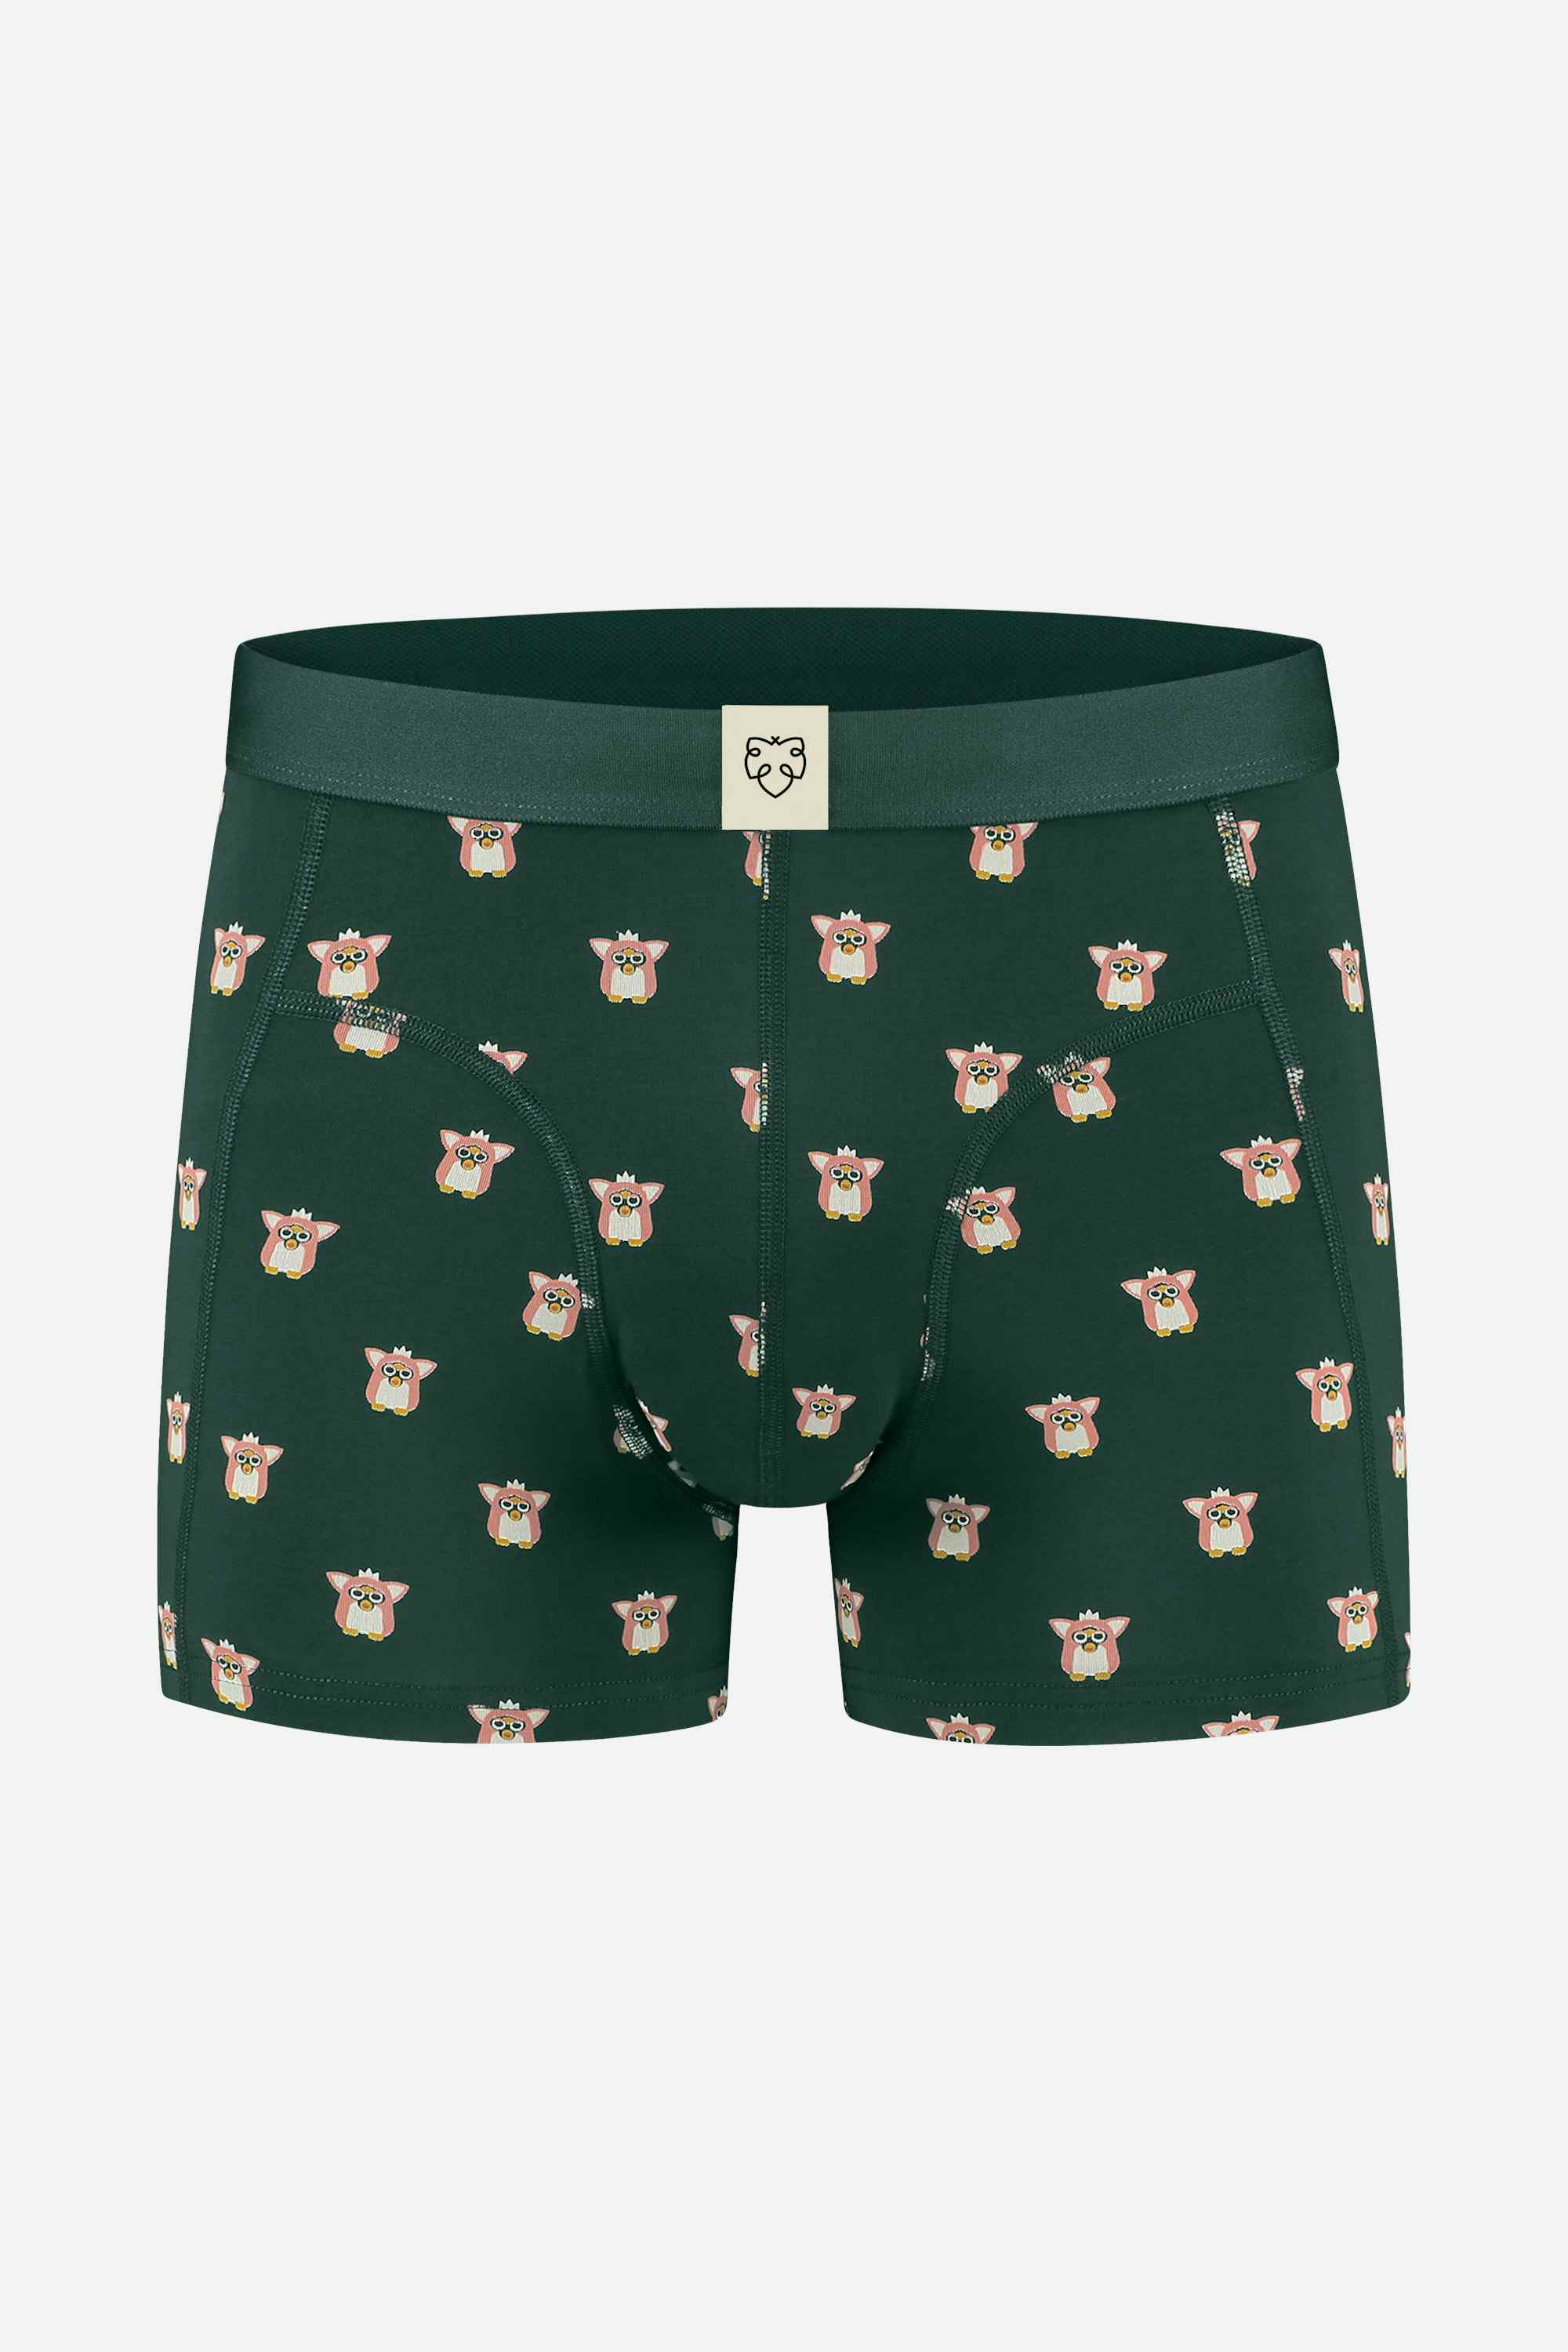 A-dam green boxer brief with furry toys from GOTS pure organic